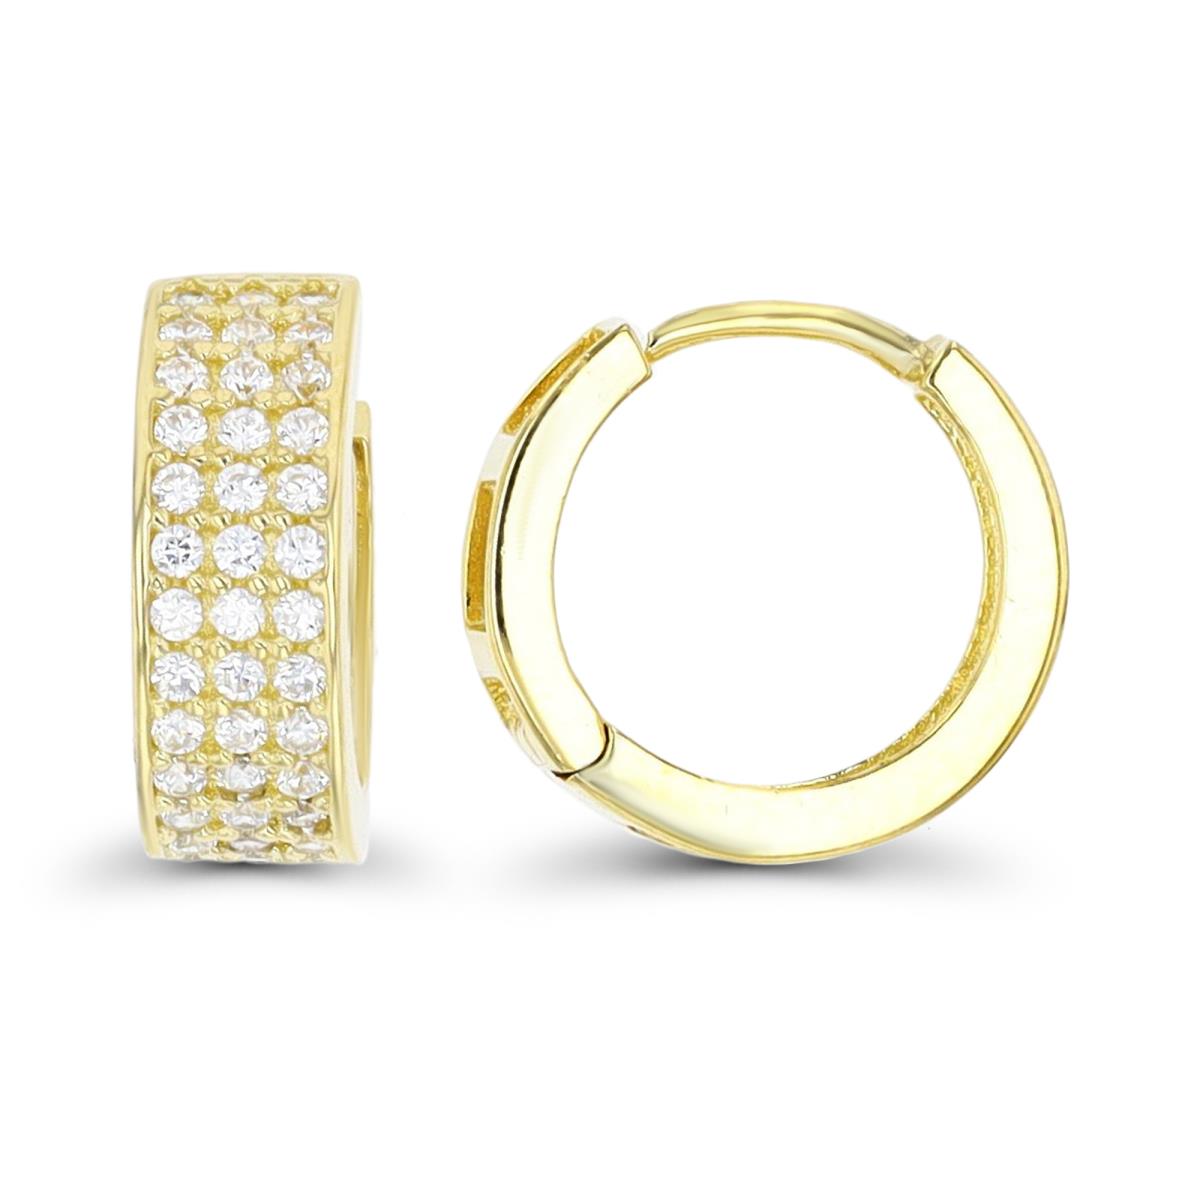 10K Yellow Gold 12x4.5mm 3-Row Pave Huggie Earring